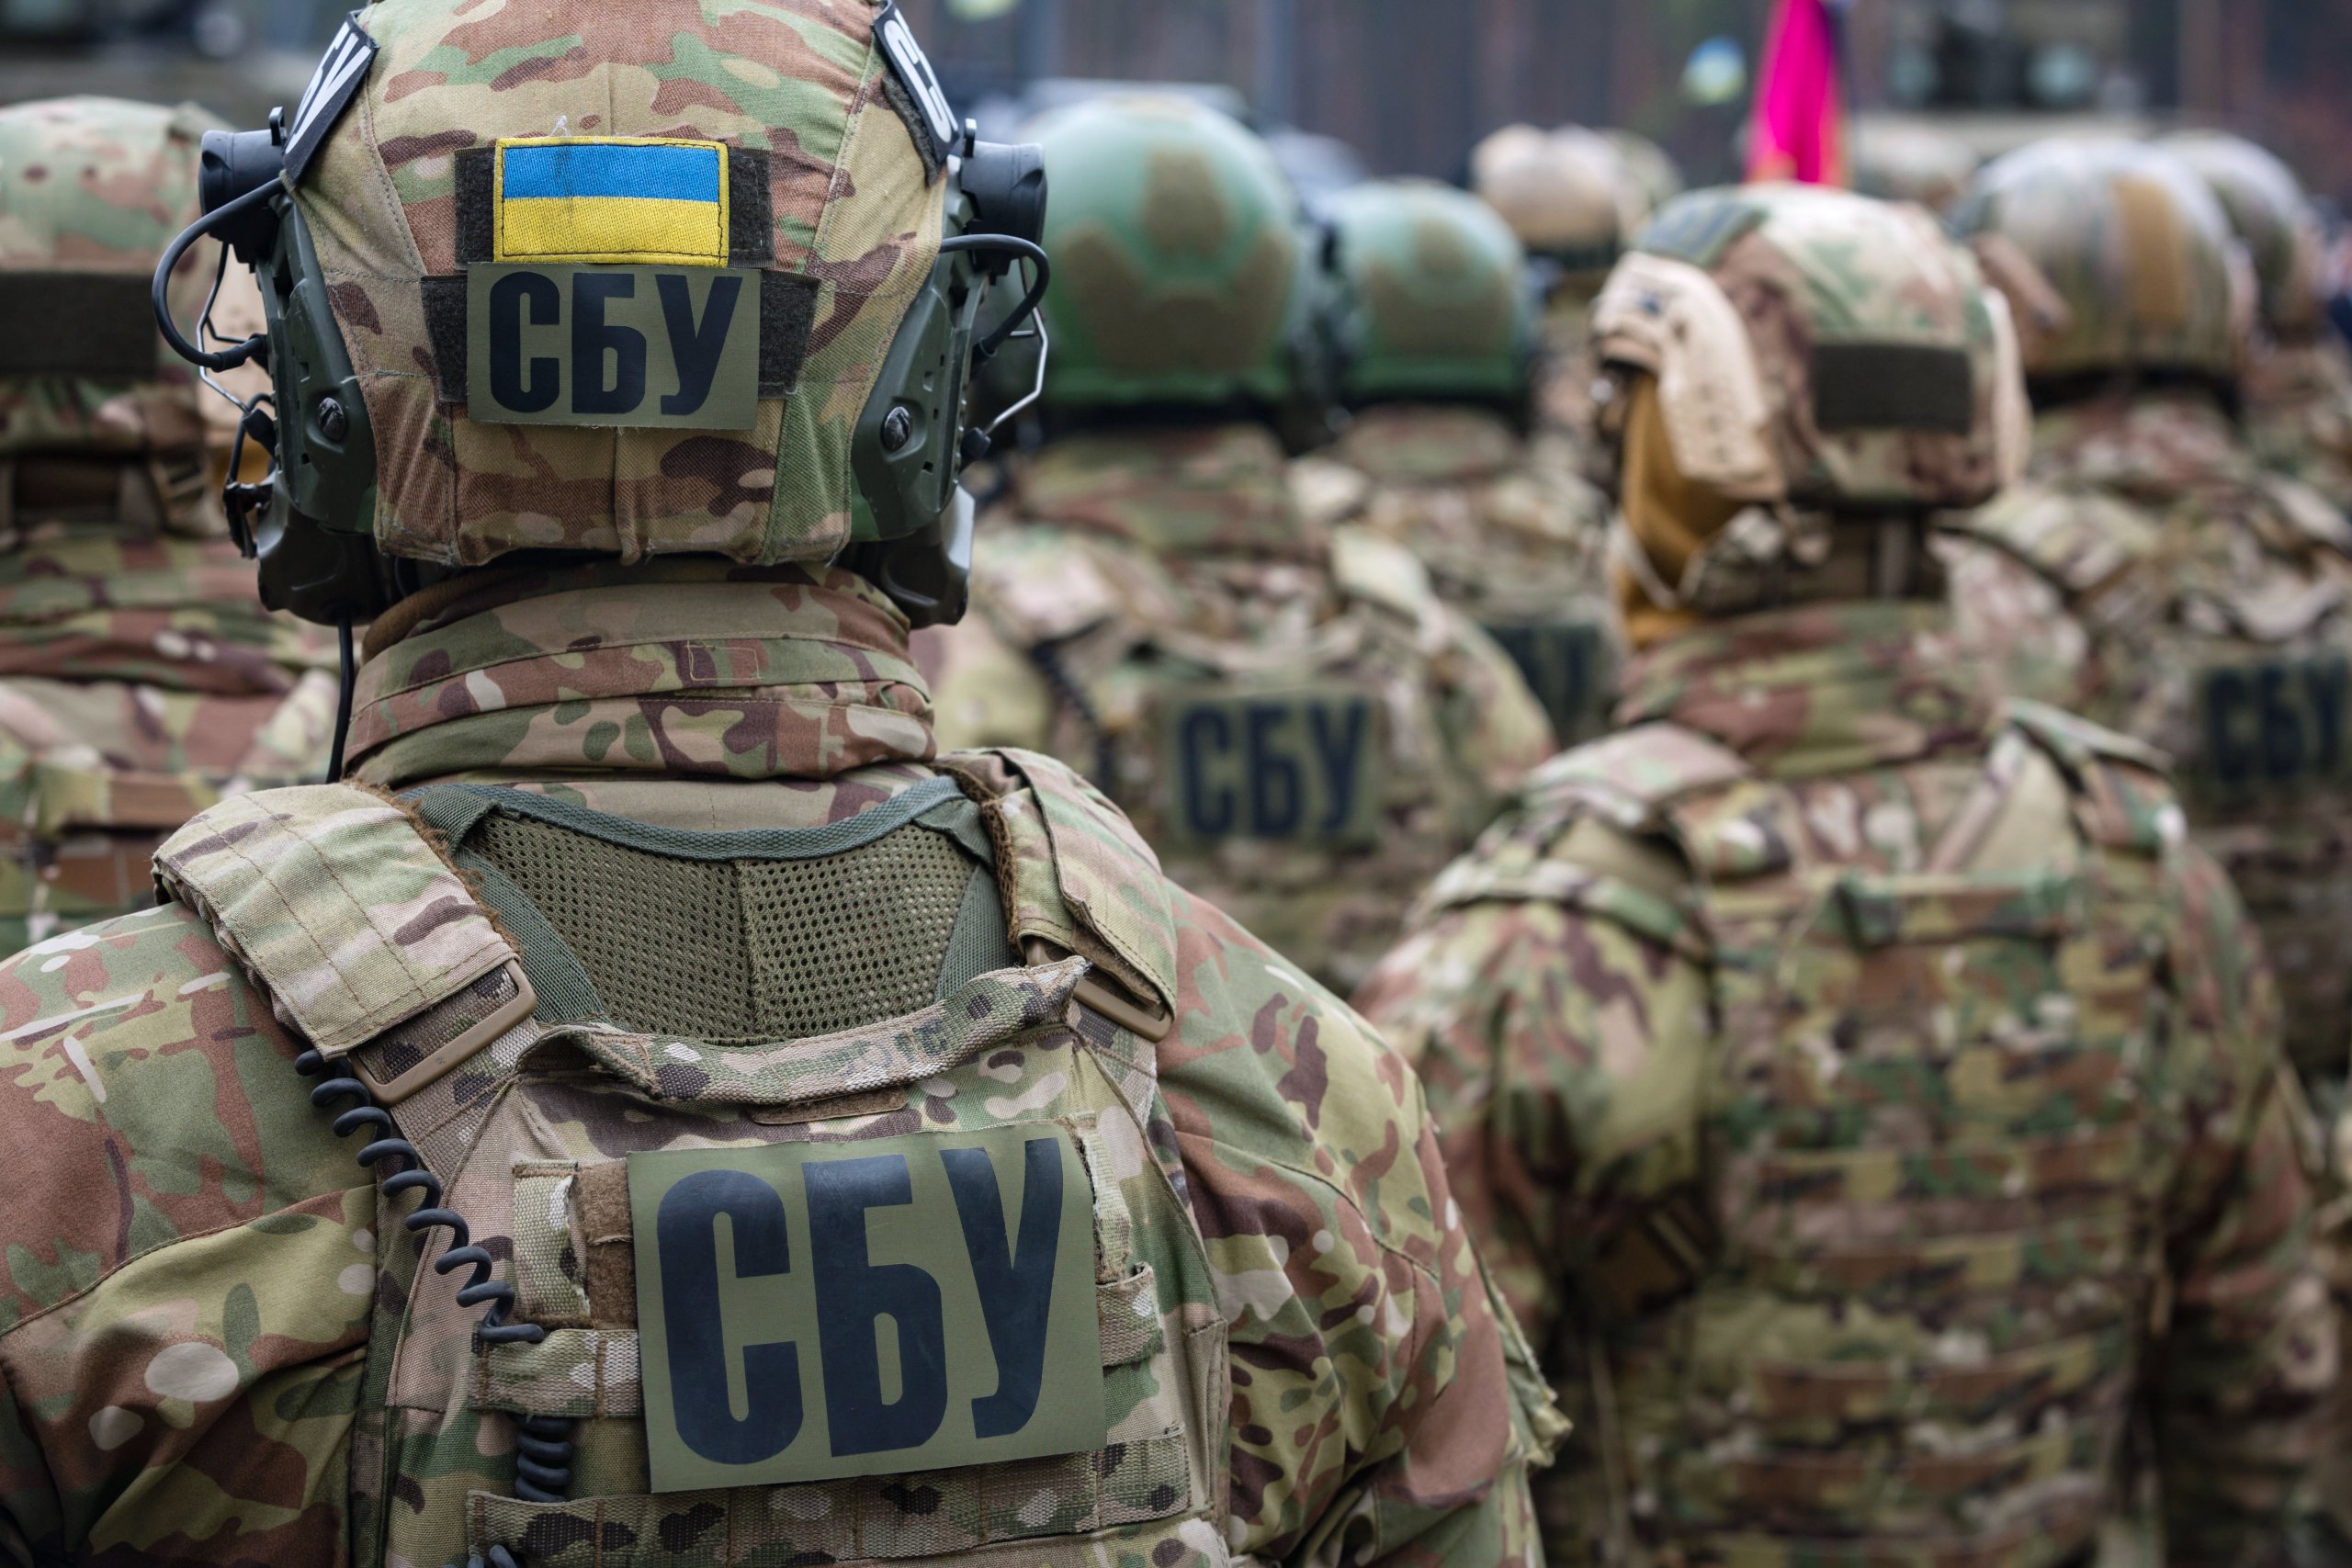 SSU arrests repeat offender attempting to track Ukrainian checkpoints near Avdiivka